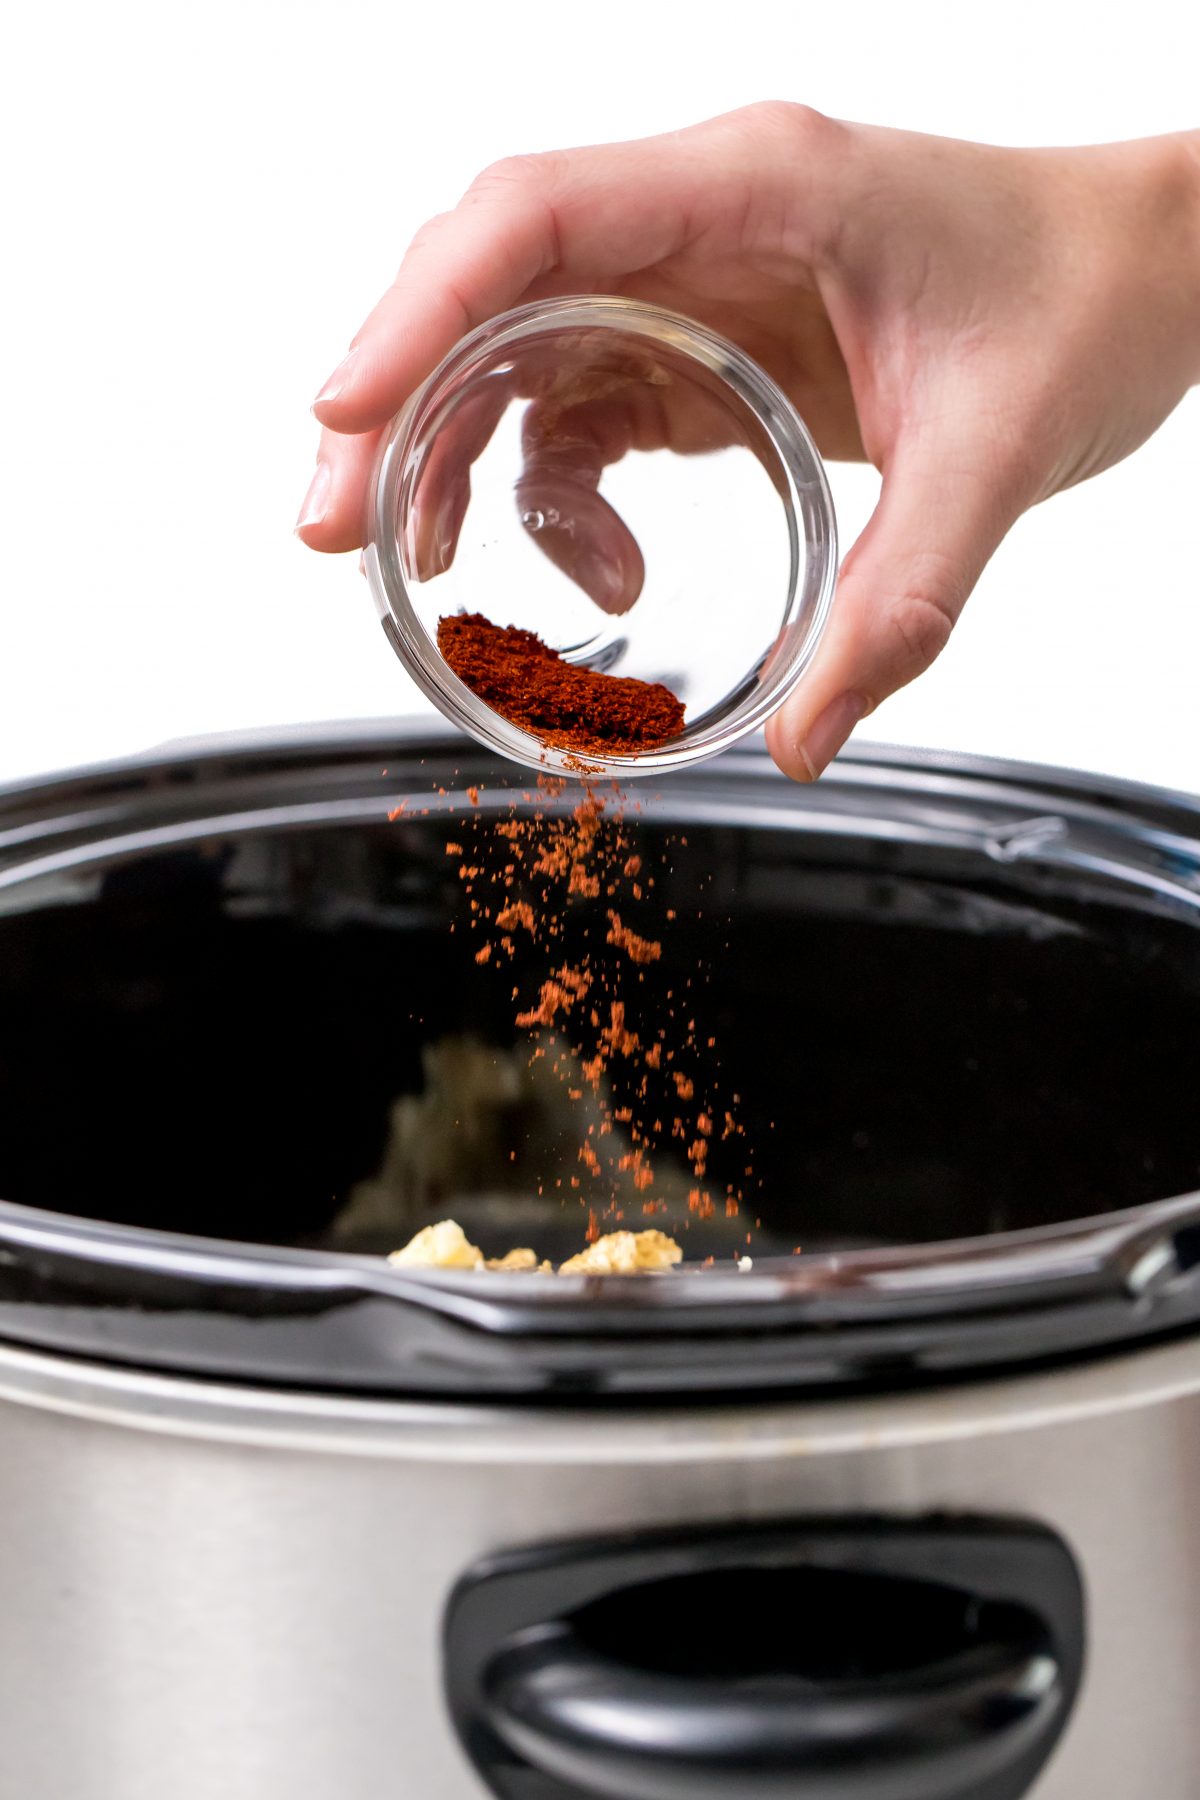 Add chili powder to slow-cooker